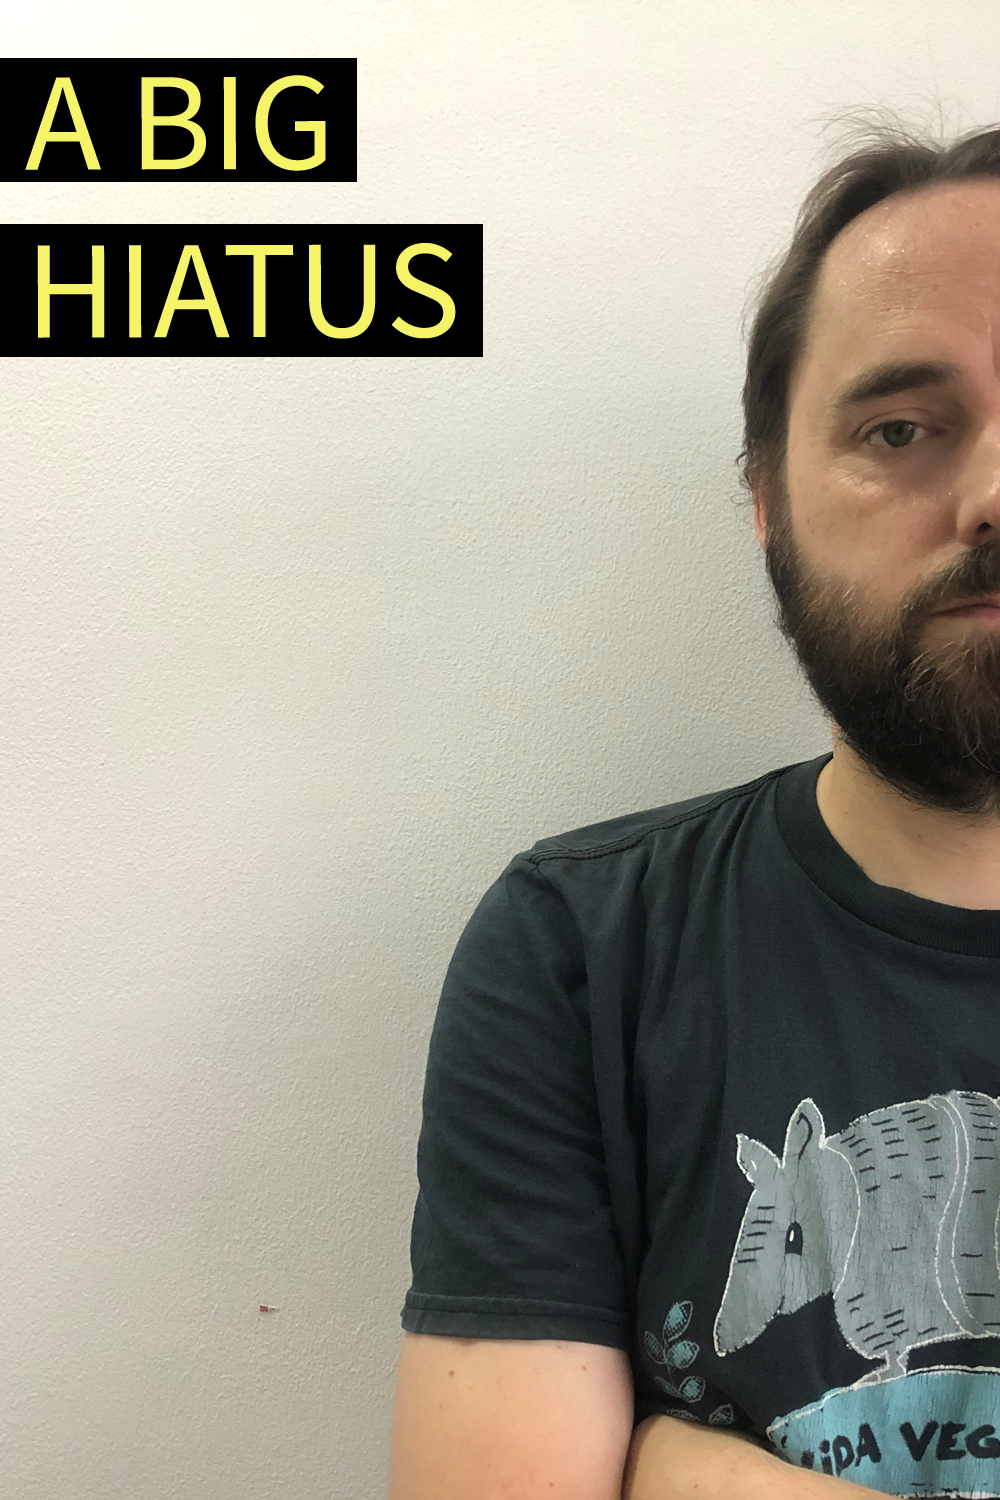 Image contains a photo of a bearded white man in a tshirt with his arms crossed. He is placed to the right of the photo and is looking directly at the camera. To the left, there is yellow text on black blocks that says "A Big Hiatus".